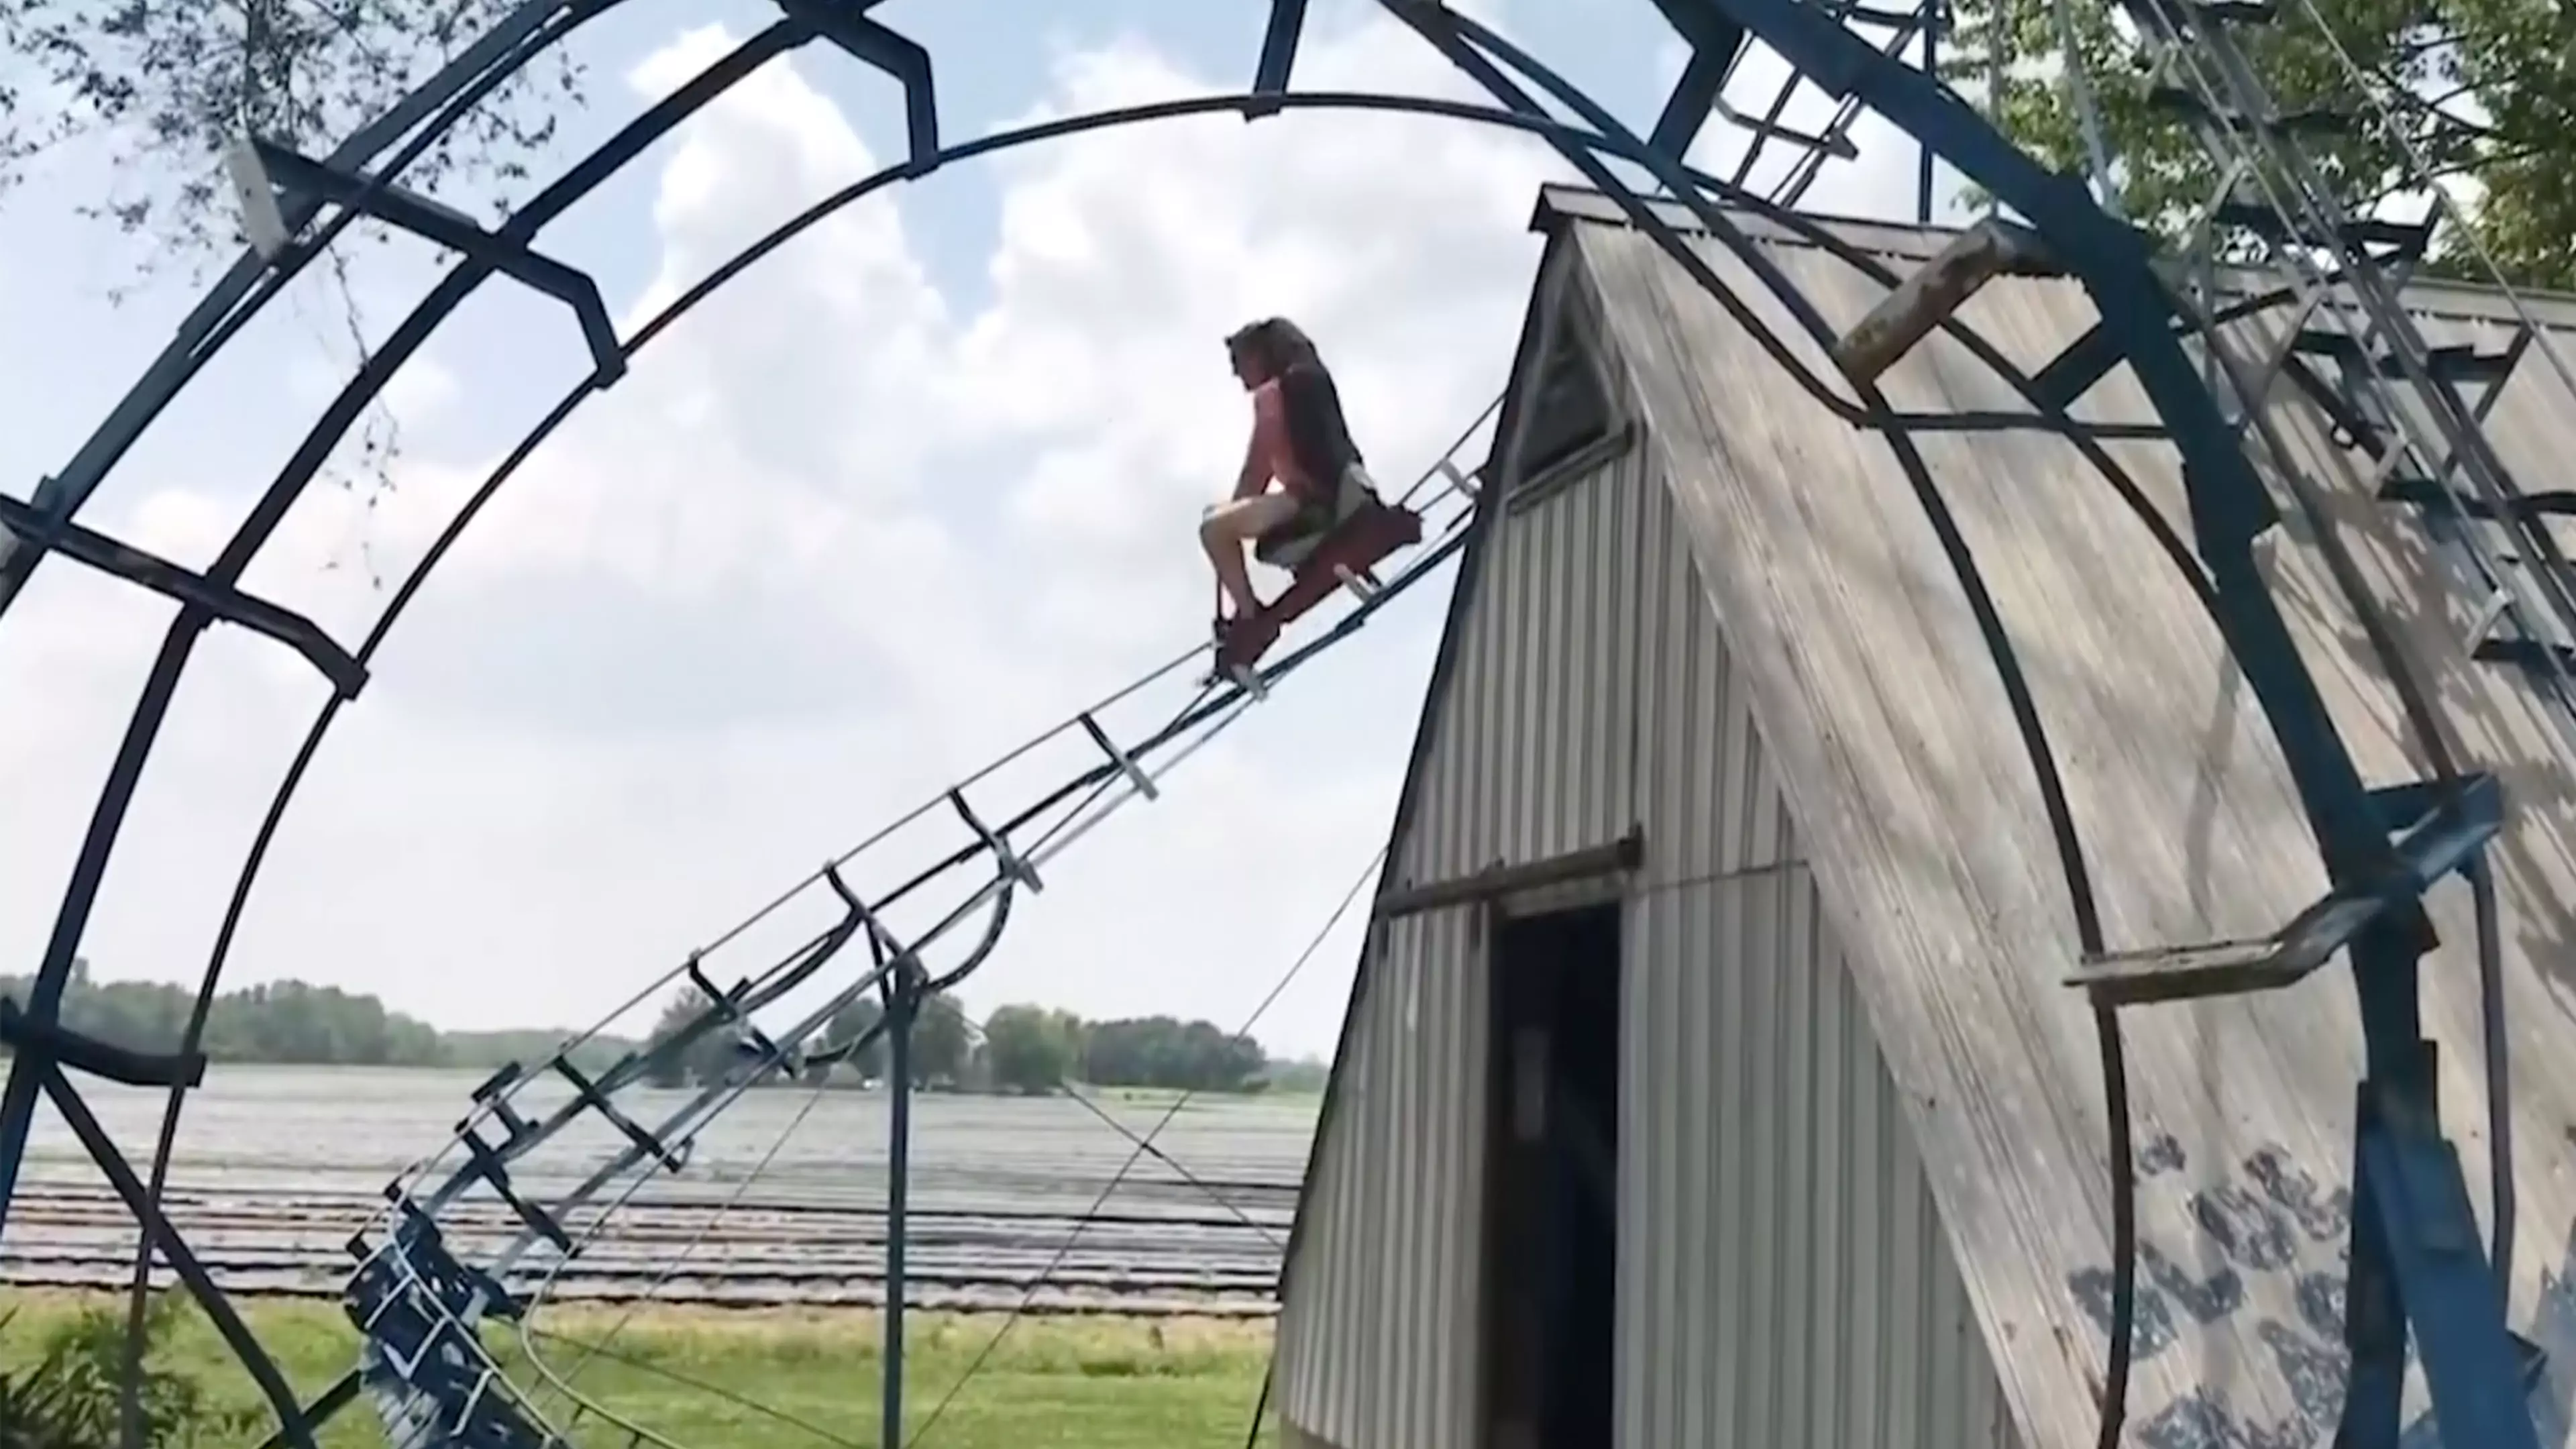 Theme Park Enthusiasts Try Out Awesome 180ft Back Yard Roller Coaster